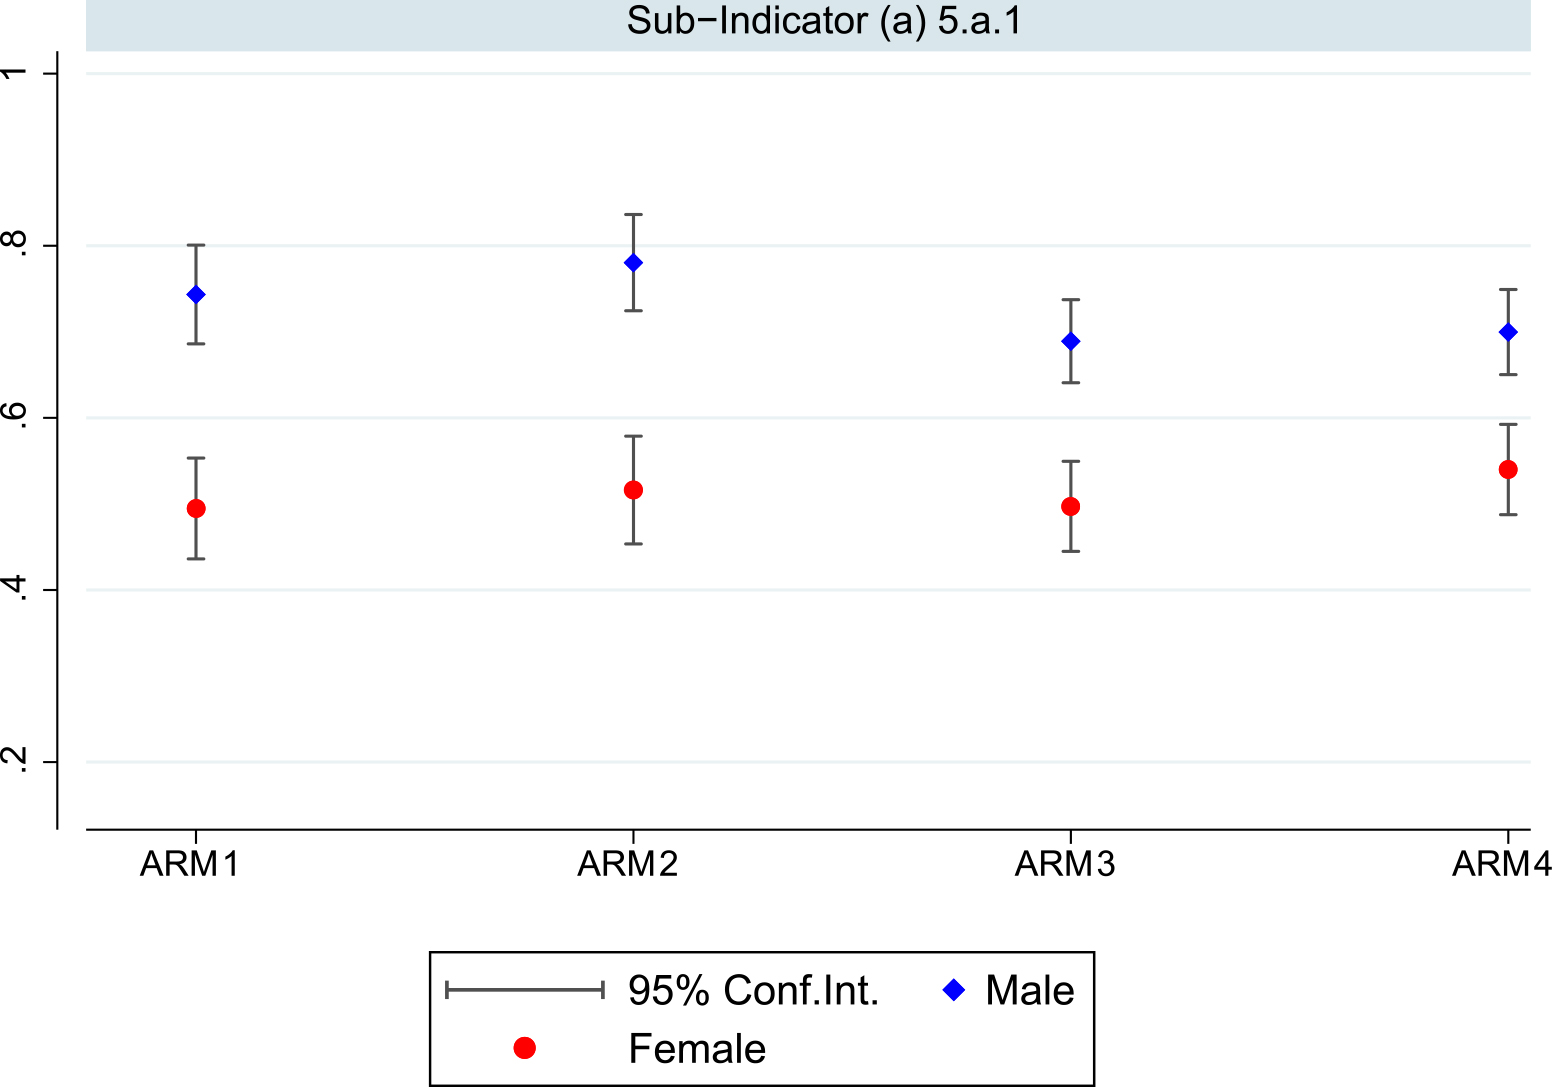  SDG 5.a.1(a), by gender and Arm. Figure extracted from Gourlay et al. [19].